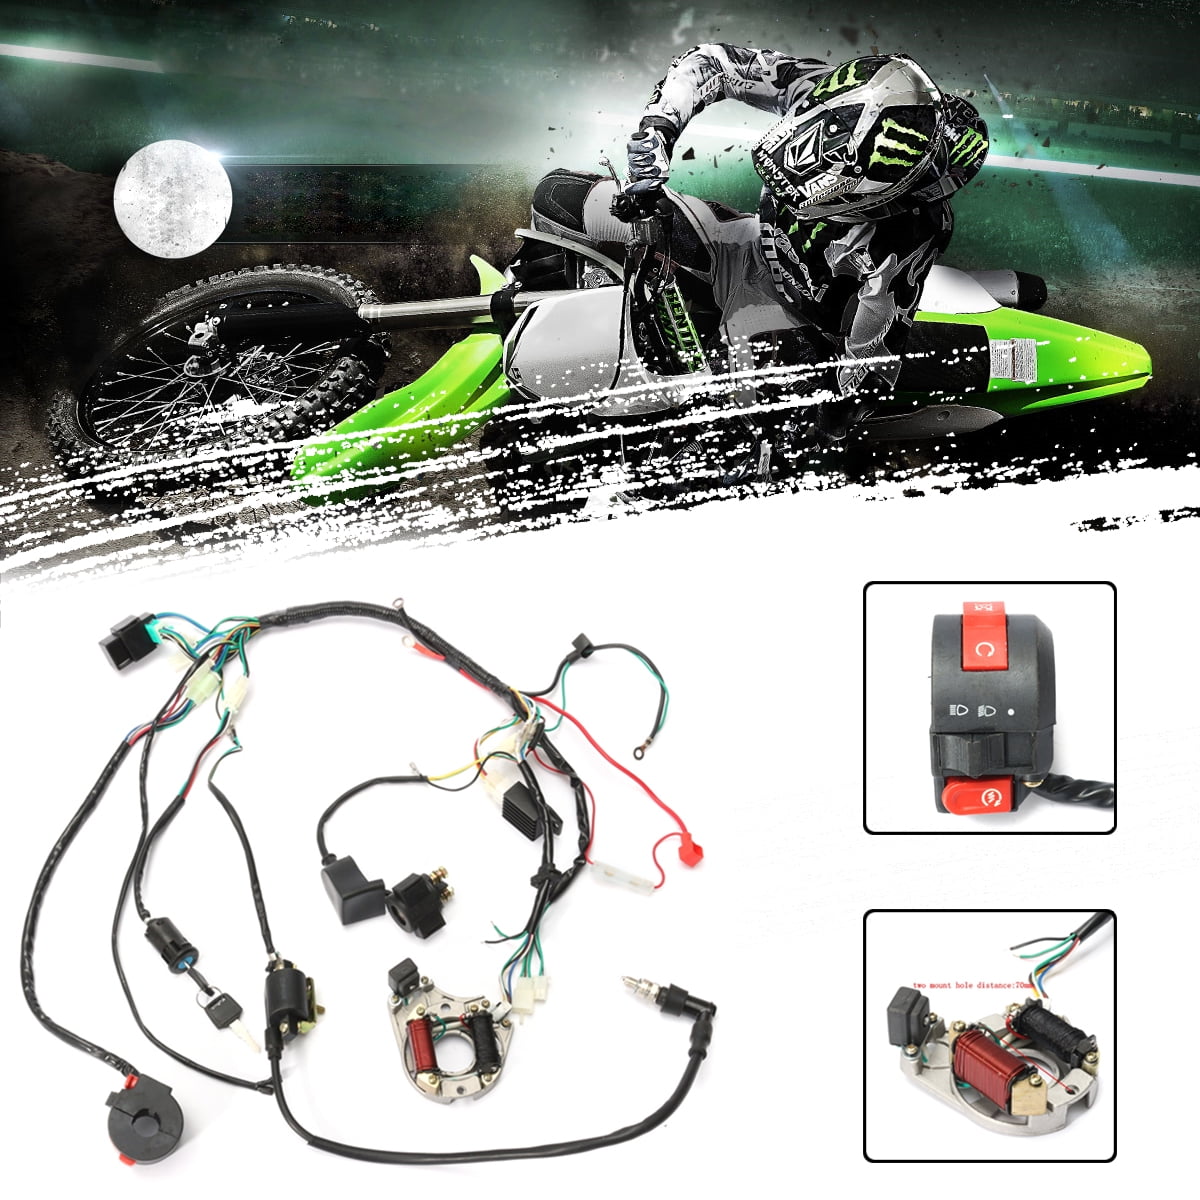 DesirePath Quad Wire Harness CDI Wire Harness Assembly Wiring Set For 50cc 70cc 90cc 110cc 125cc Chinese ATV Electric Stator CDI Coil ATV Quad Bike Buggy Go Kart 